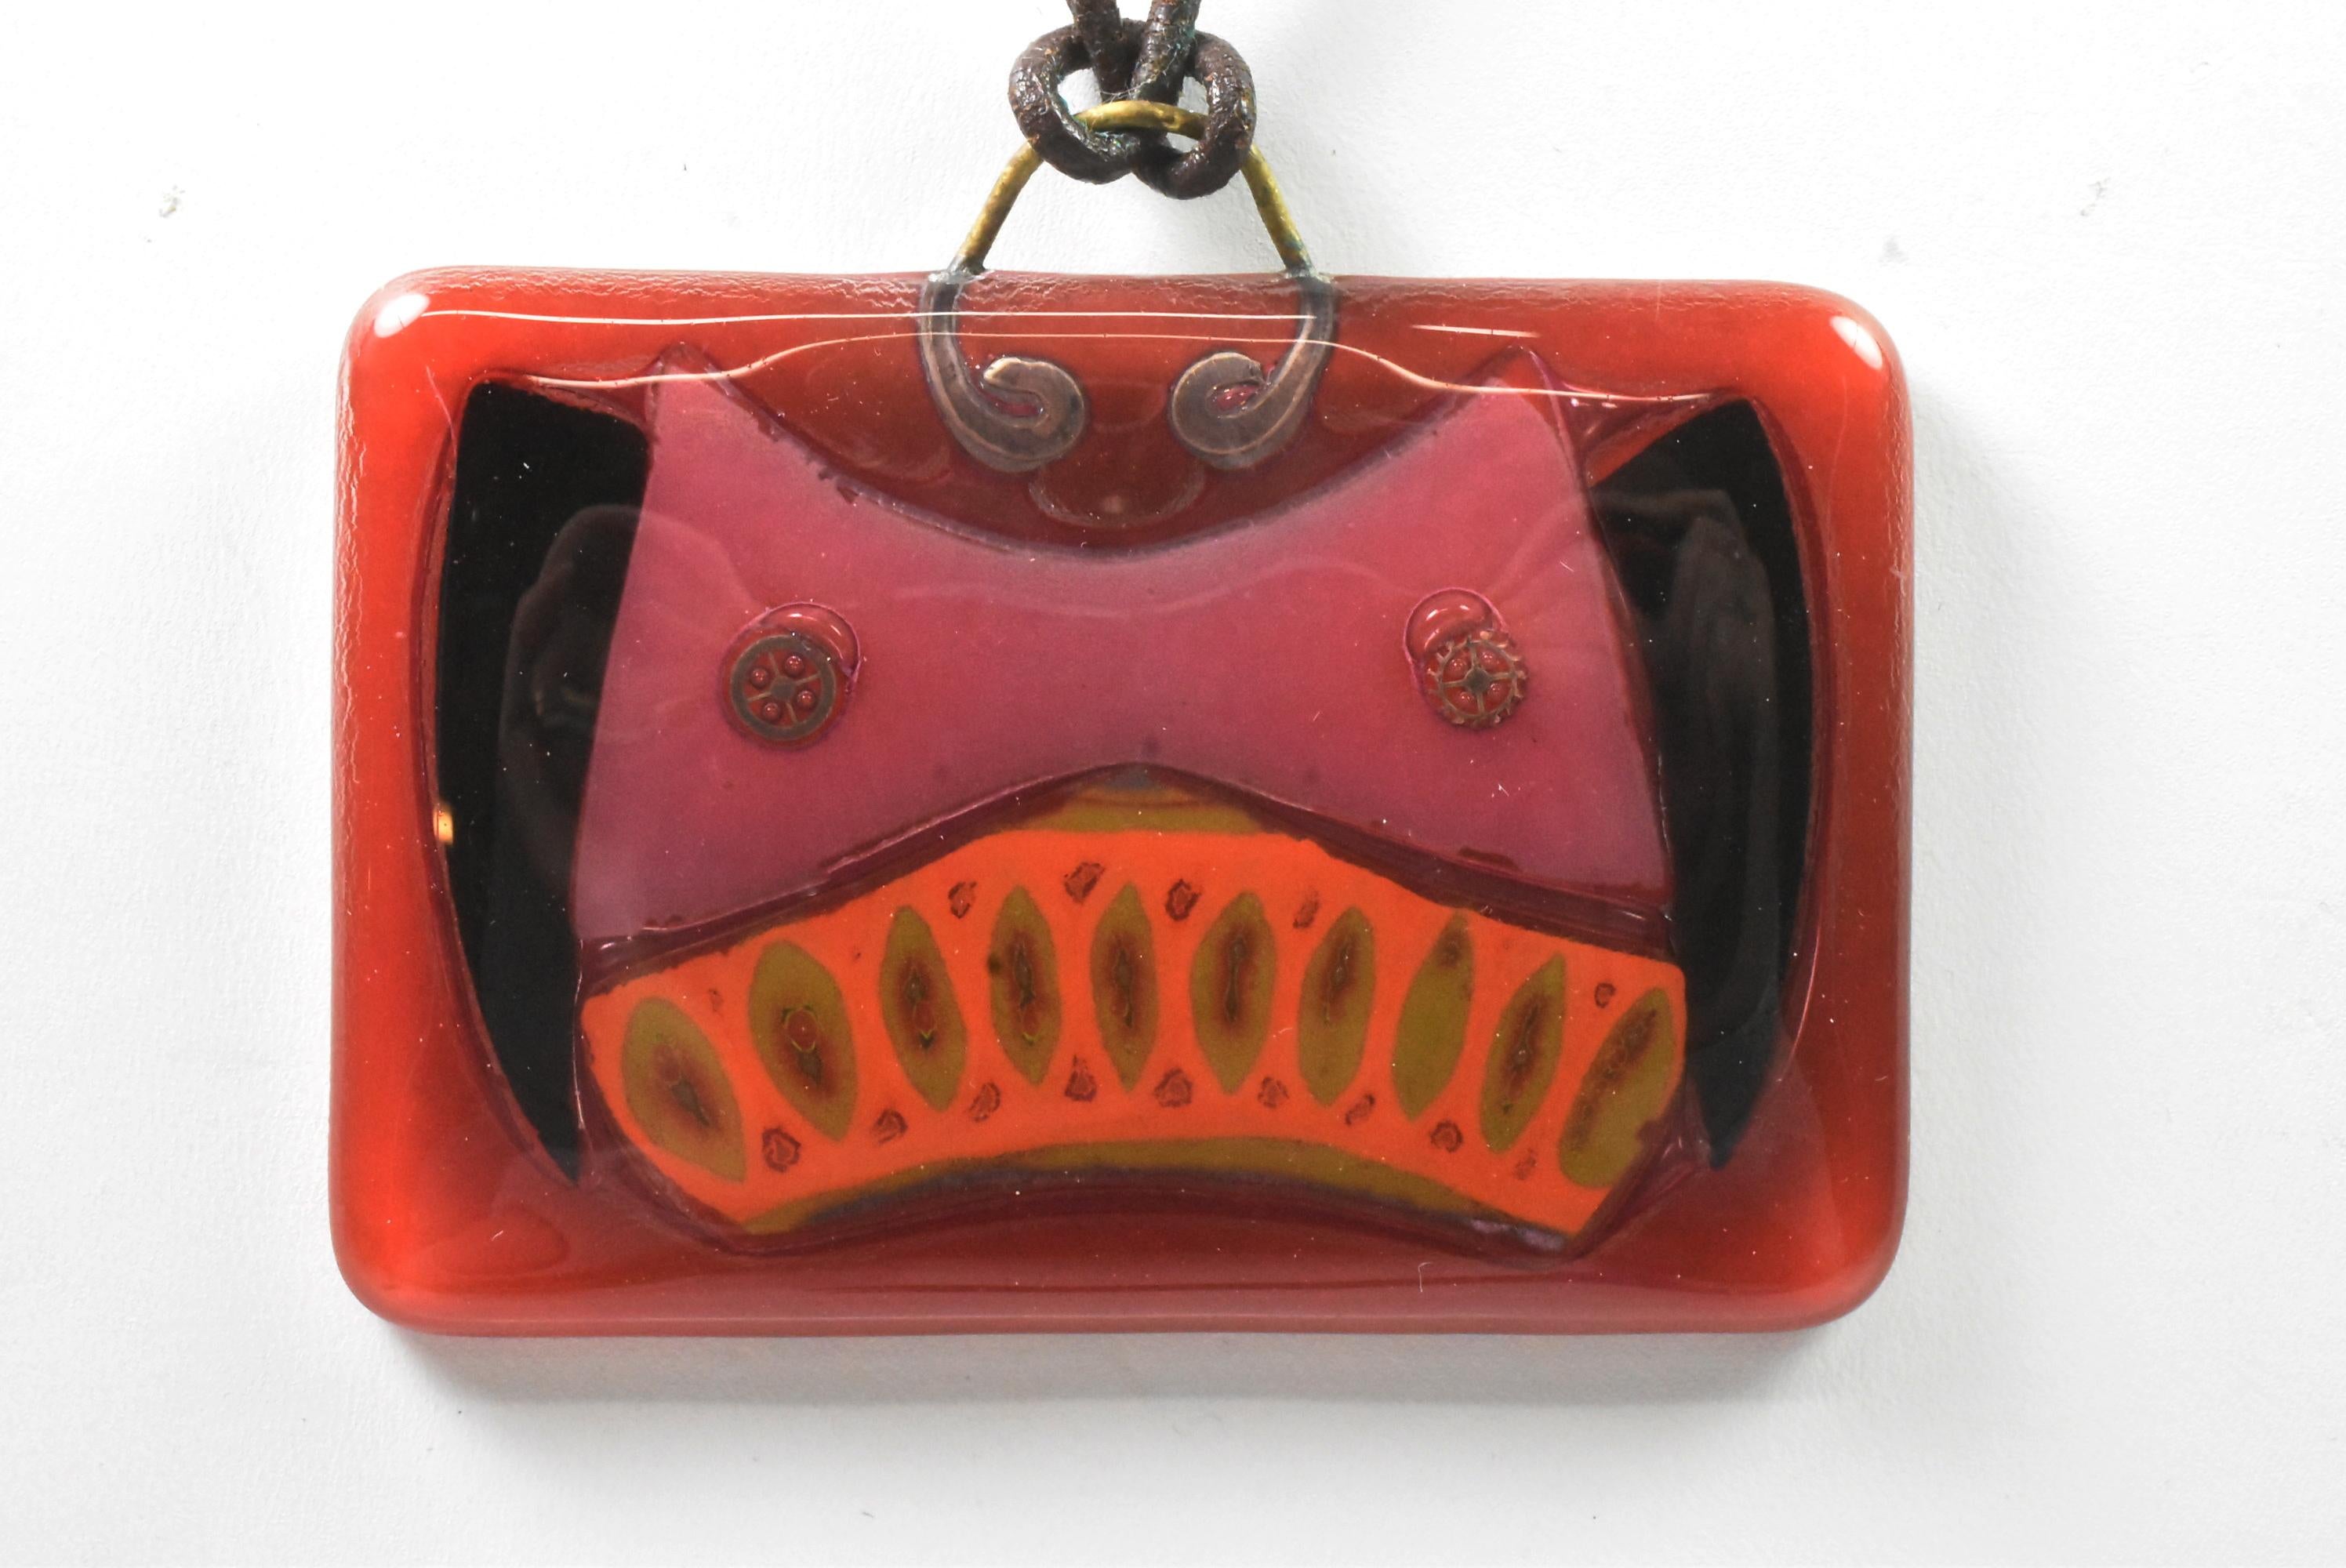 Vintage Michael and Frances Higgins American Modernist Fused Glass Pendant. Vintage 1960s handmade glass pendant of ruby red with black, pink, orange and gold. Signed on back. Great condition, no chips or scratches. 23